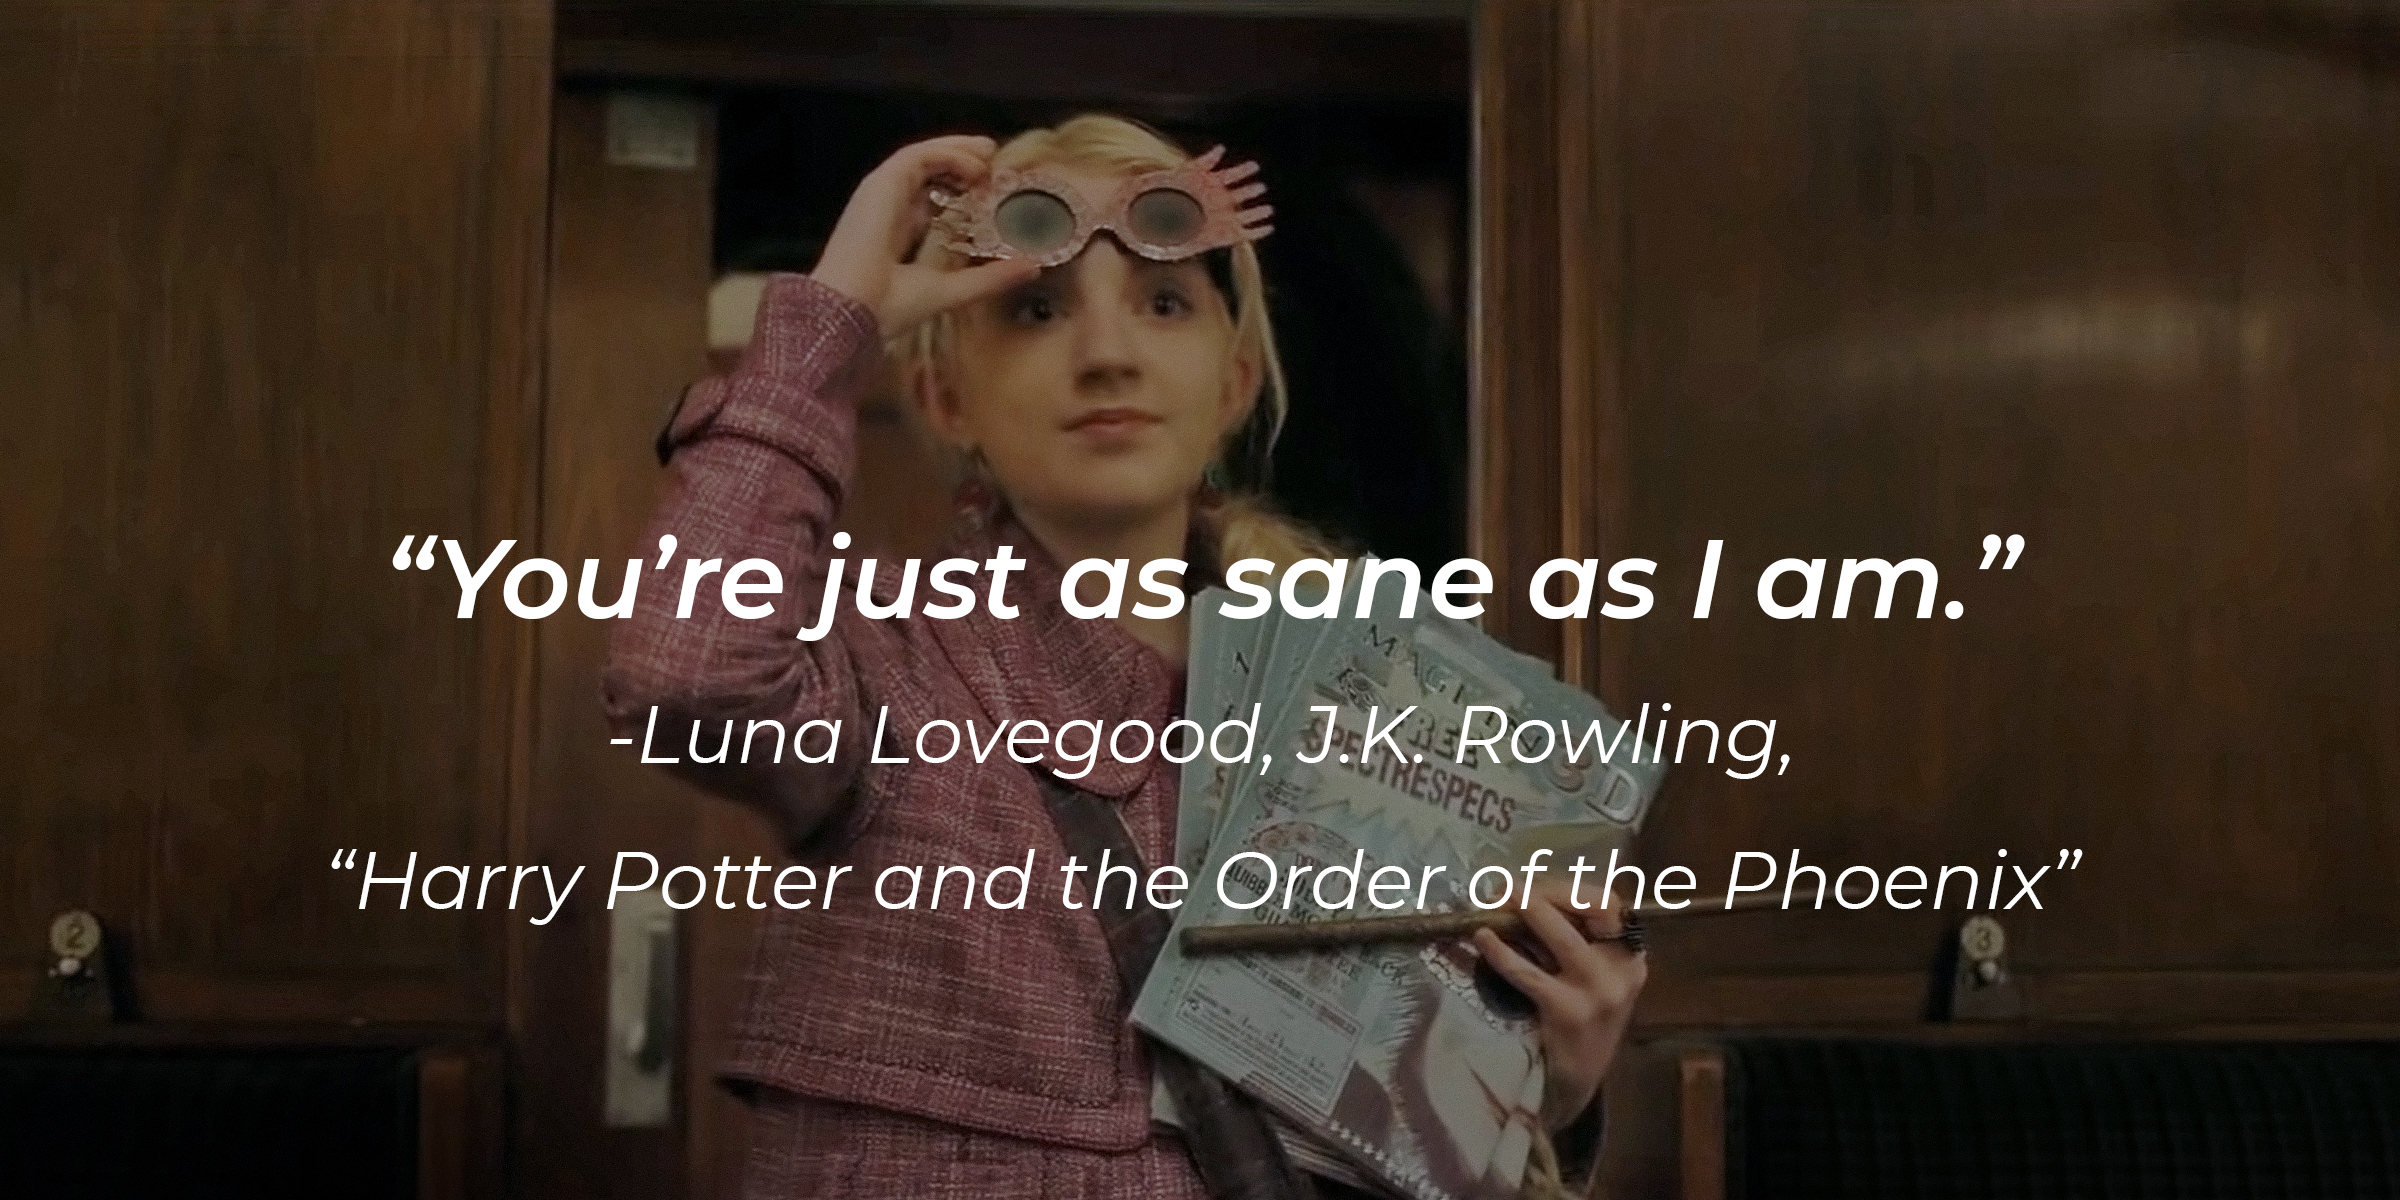 Luna Lovegood’s quote from J.K. Rowling's “Harry Potter and the Order of the Pheonix” : “You’re just as sane as I am.” | Source: youtube.com/WizardingWorld